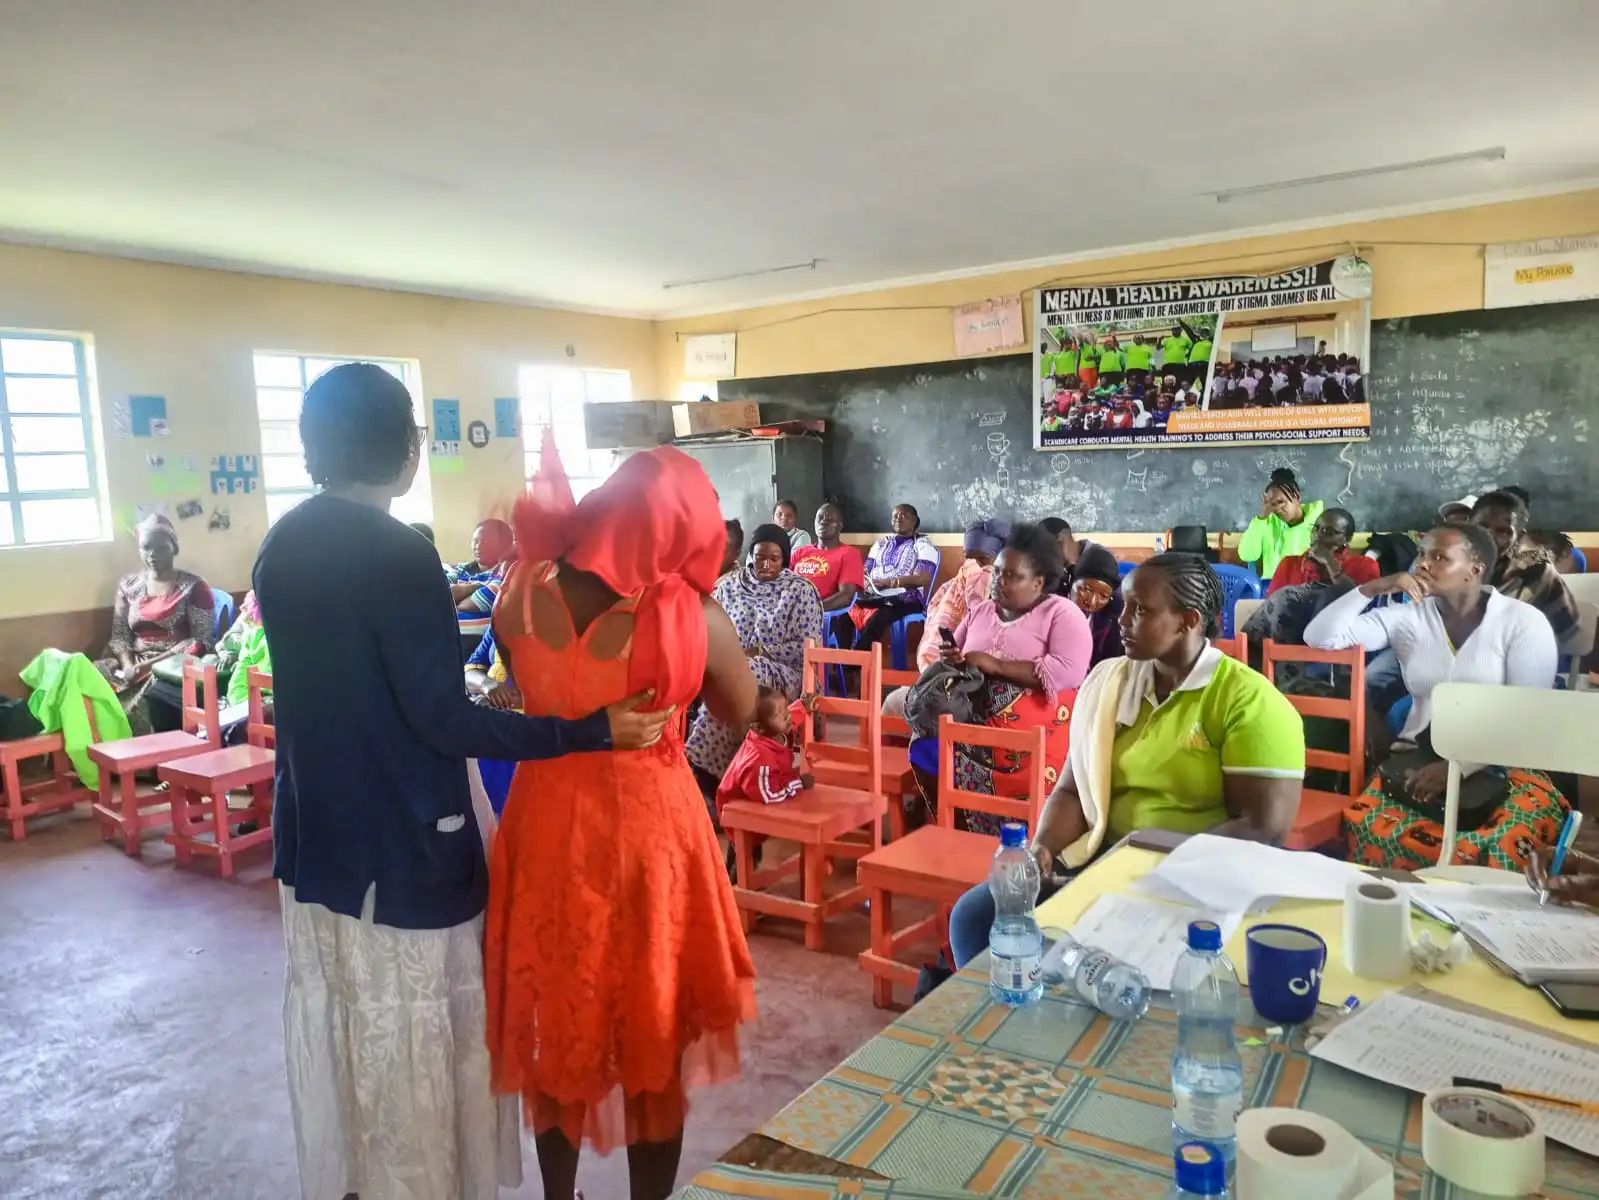 Immaculate Munyao, a clinical psychologist, took the parents through the various stages of grief to help the parents accept their children's situation. The caregivers shared their personal journeys, the wins and the challenges in raising this group of children.